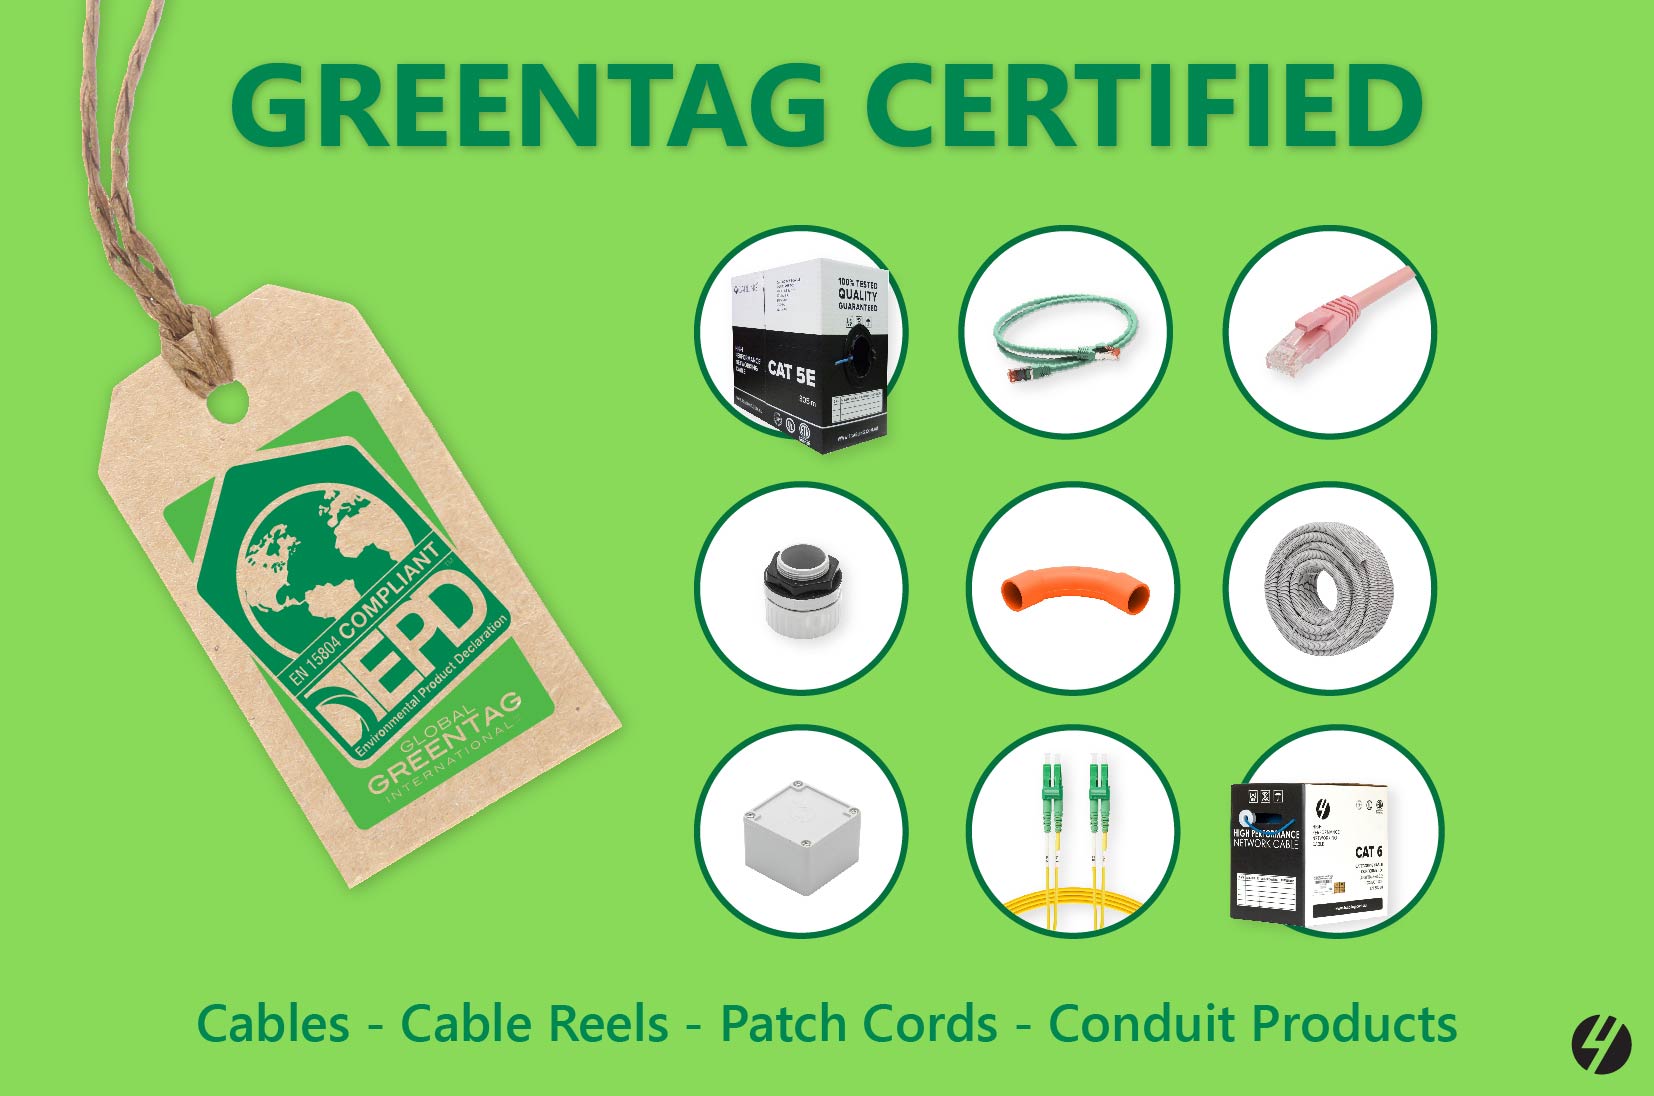 4Cabling receives certification from Global GreenTag